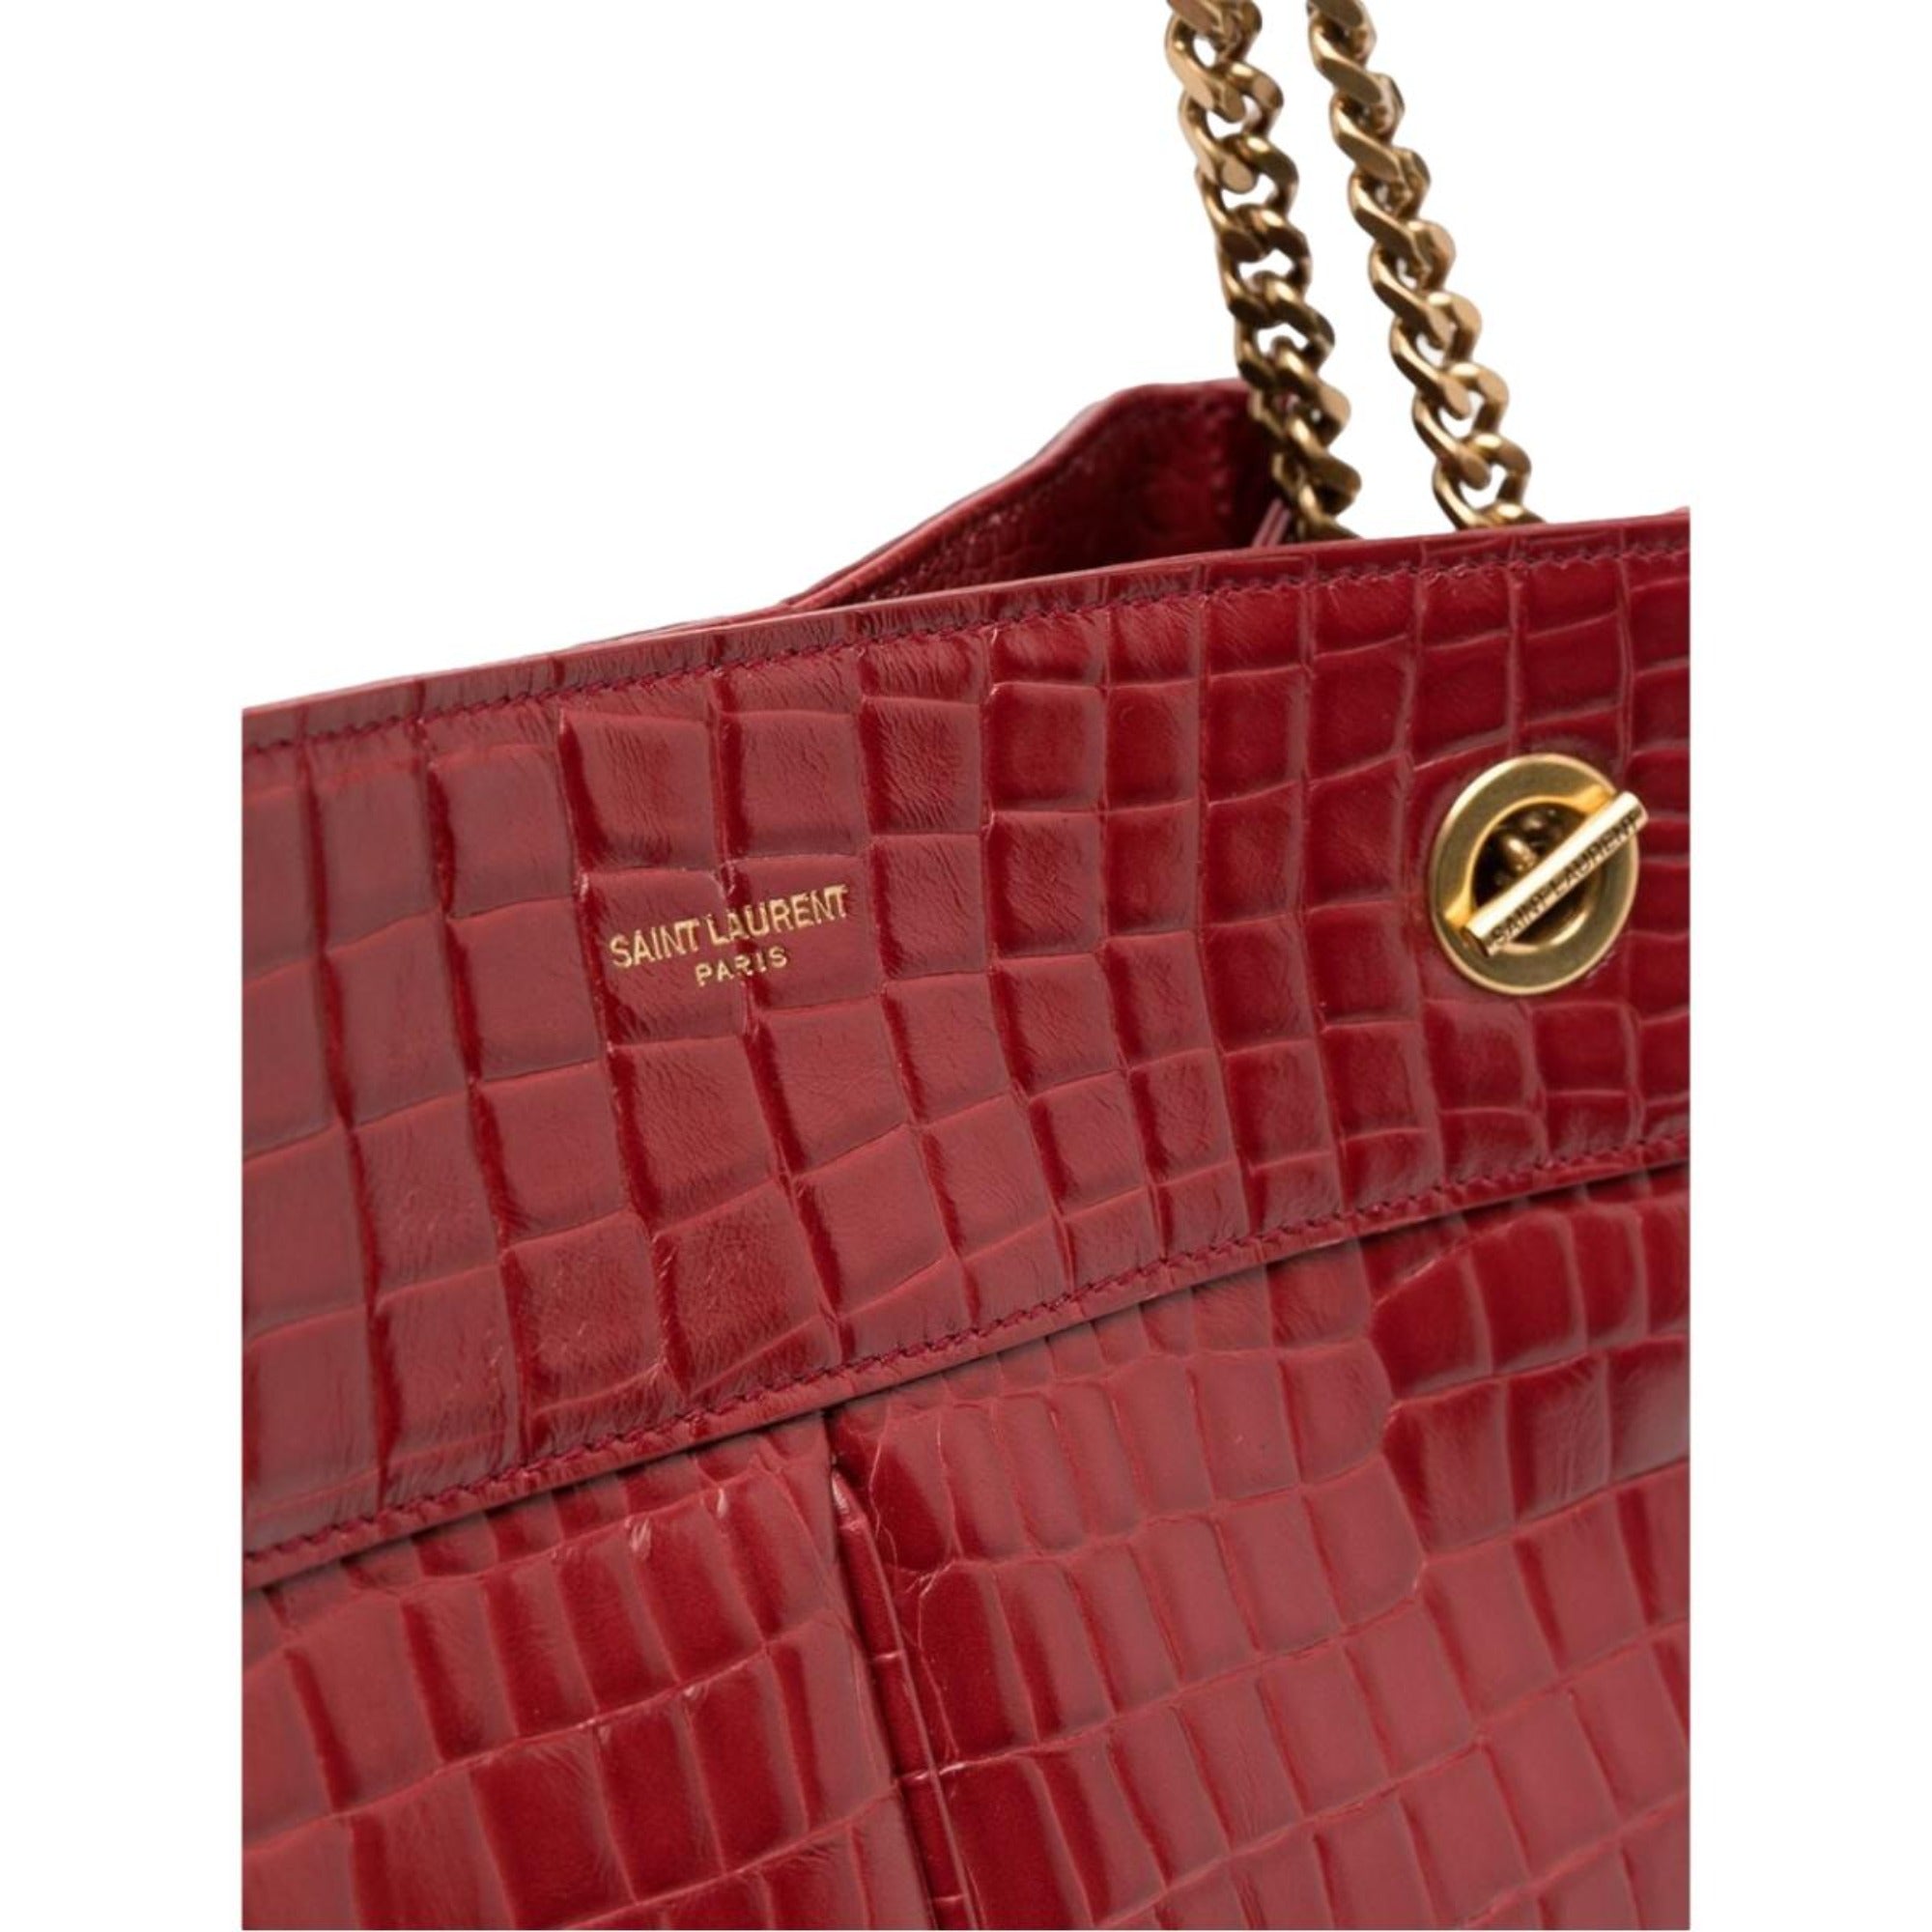 Saint Laurent Claude Red Leather Cocco Embossed Shoulder Bag 640281 at_Queen_Bee_of_Beverly_Hills